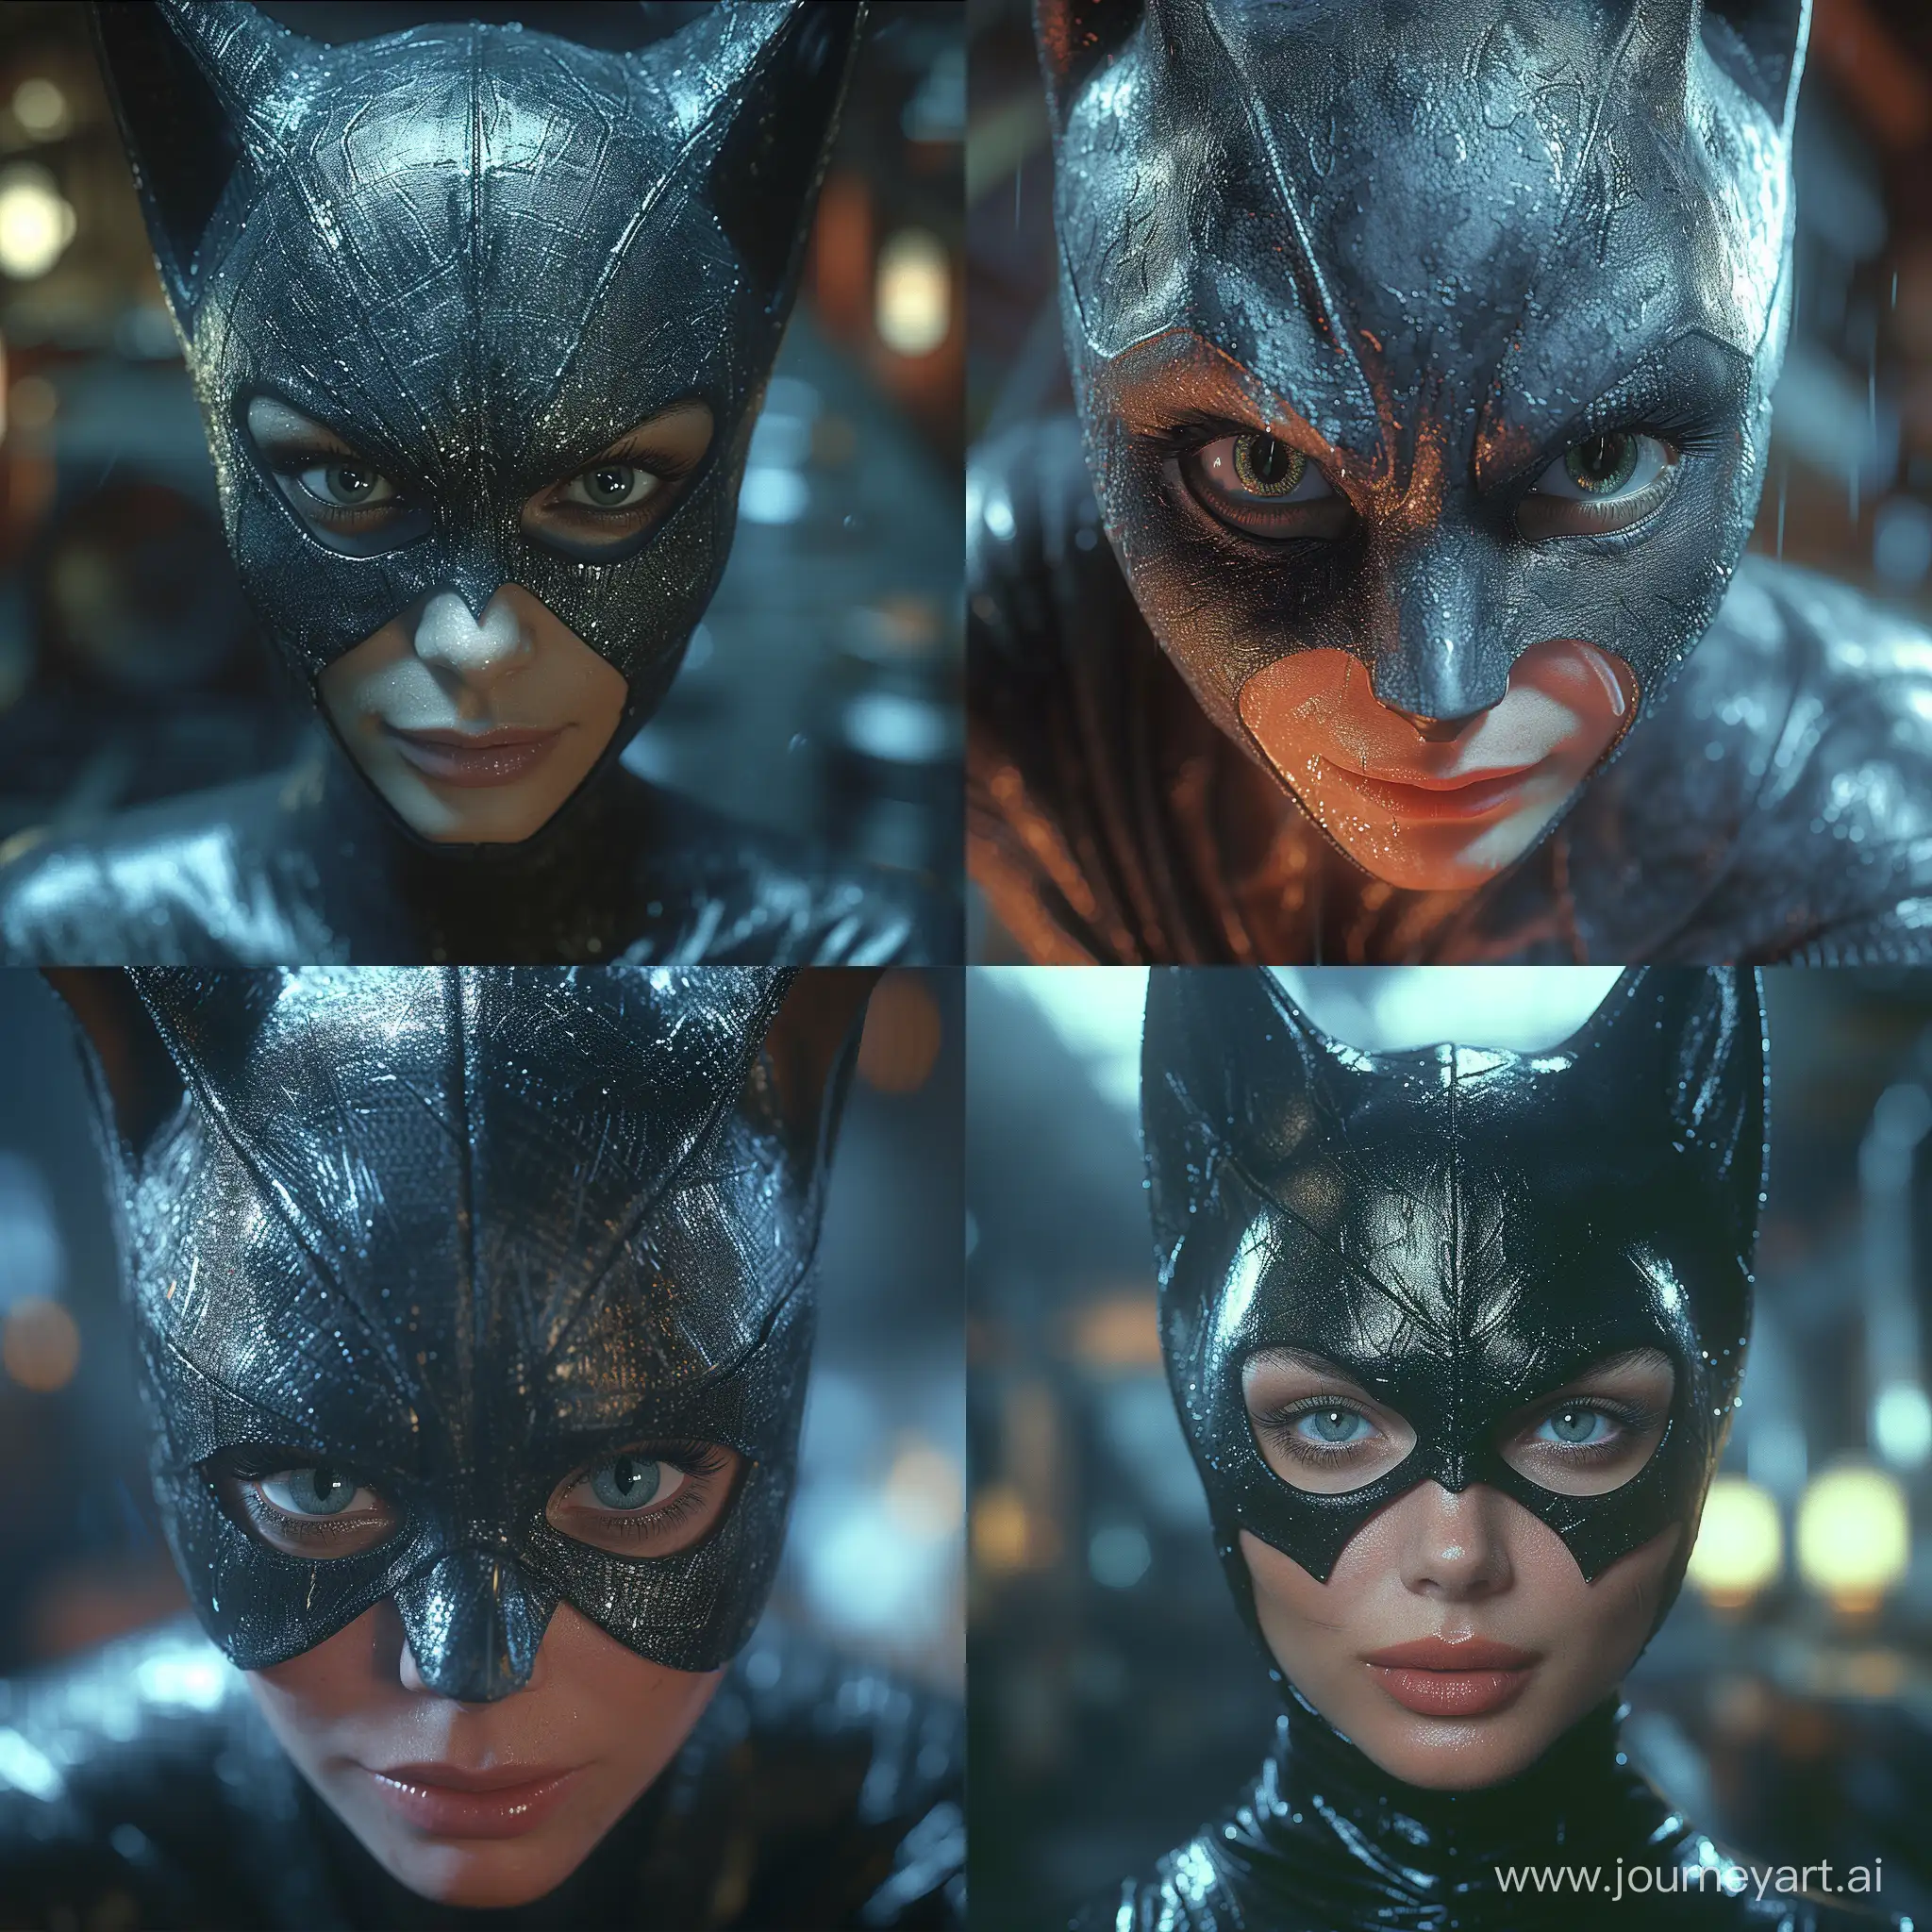 a close-up of  realistic catwoman 1989 costume,  the opening for the eyes and lower part of the face. The character's expression is serious or stern, consistent with the typical portrayal of Batman as a determined and intense superhero. The costume appears to be made of a material that mimics the texture of leather,  readiness to face danger. The lighting is dim, suggesting a dark or nighttime setting, which is characteristic of the Gotham City environment where catwoman often operates. The background is blurred and not clearly discernible, but it seems to be a gloomy and possibly industrial setting, adding to the overall dark and gritty atmosphere often associated with catwoman media  --stylize 750 
 